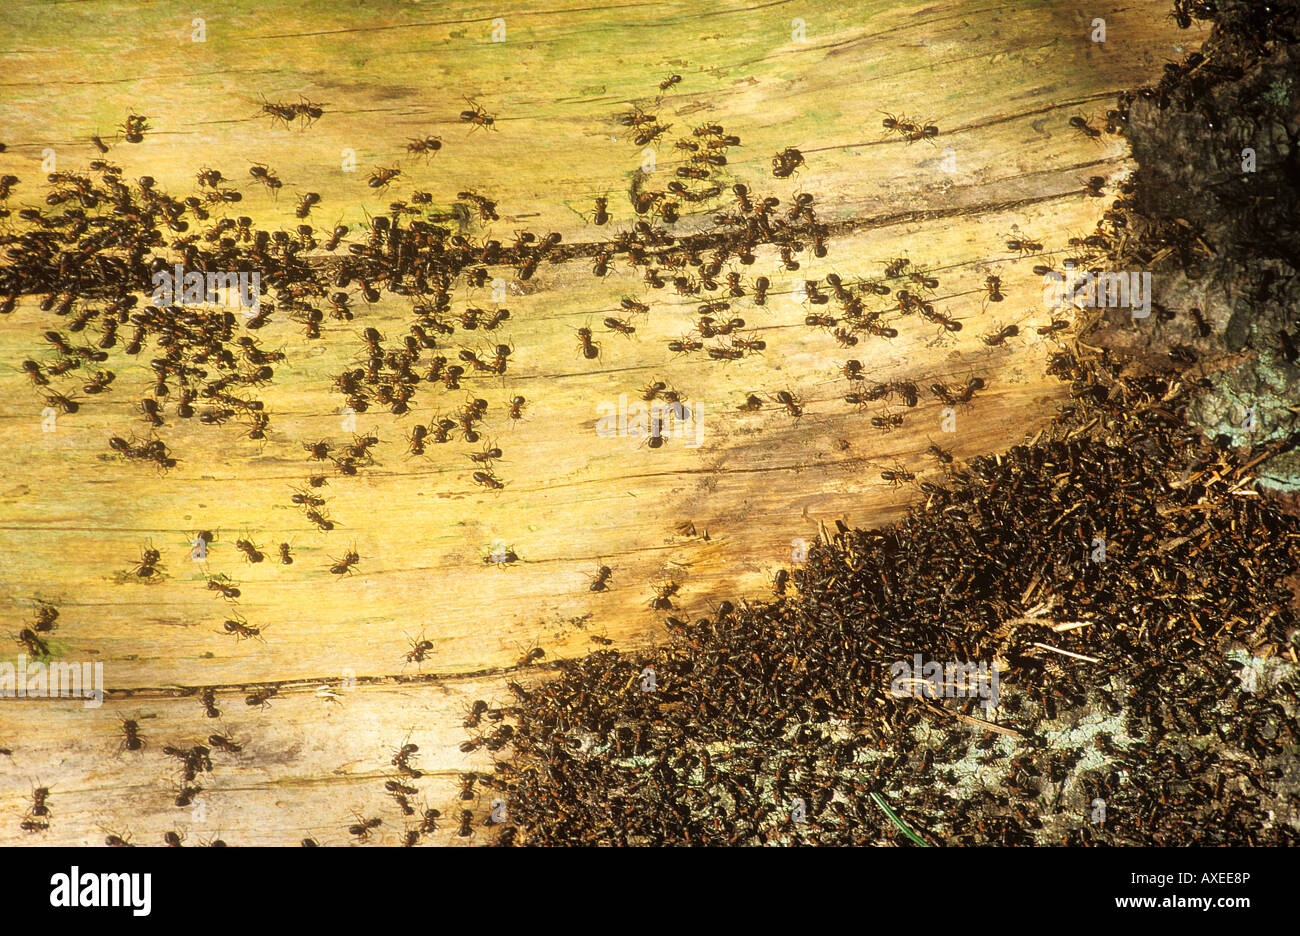 southern wood ants on wood / Formica rufa Stock Photo